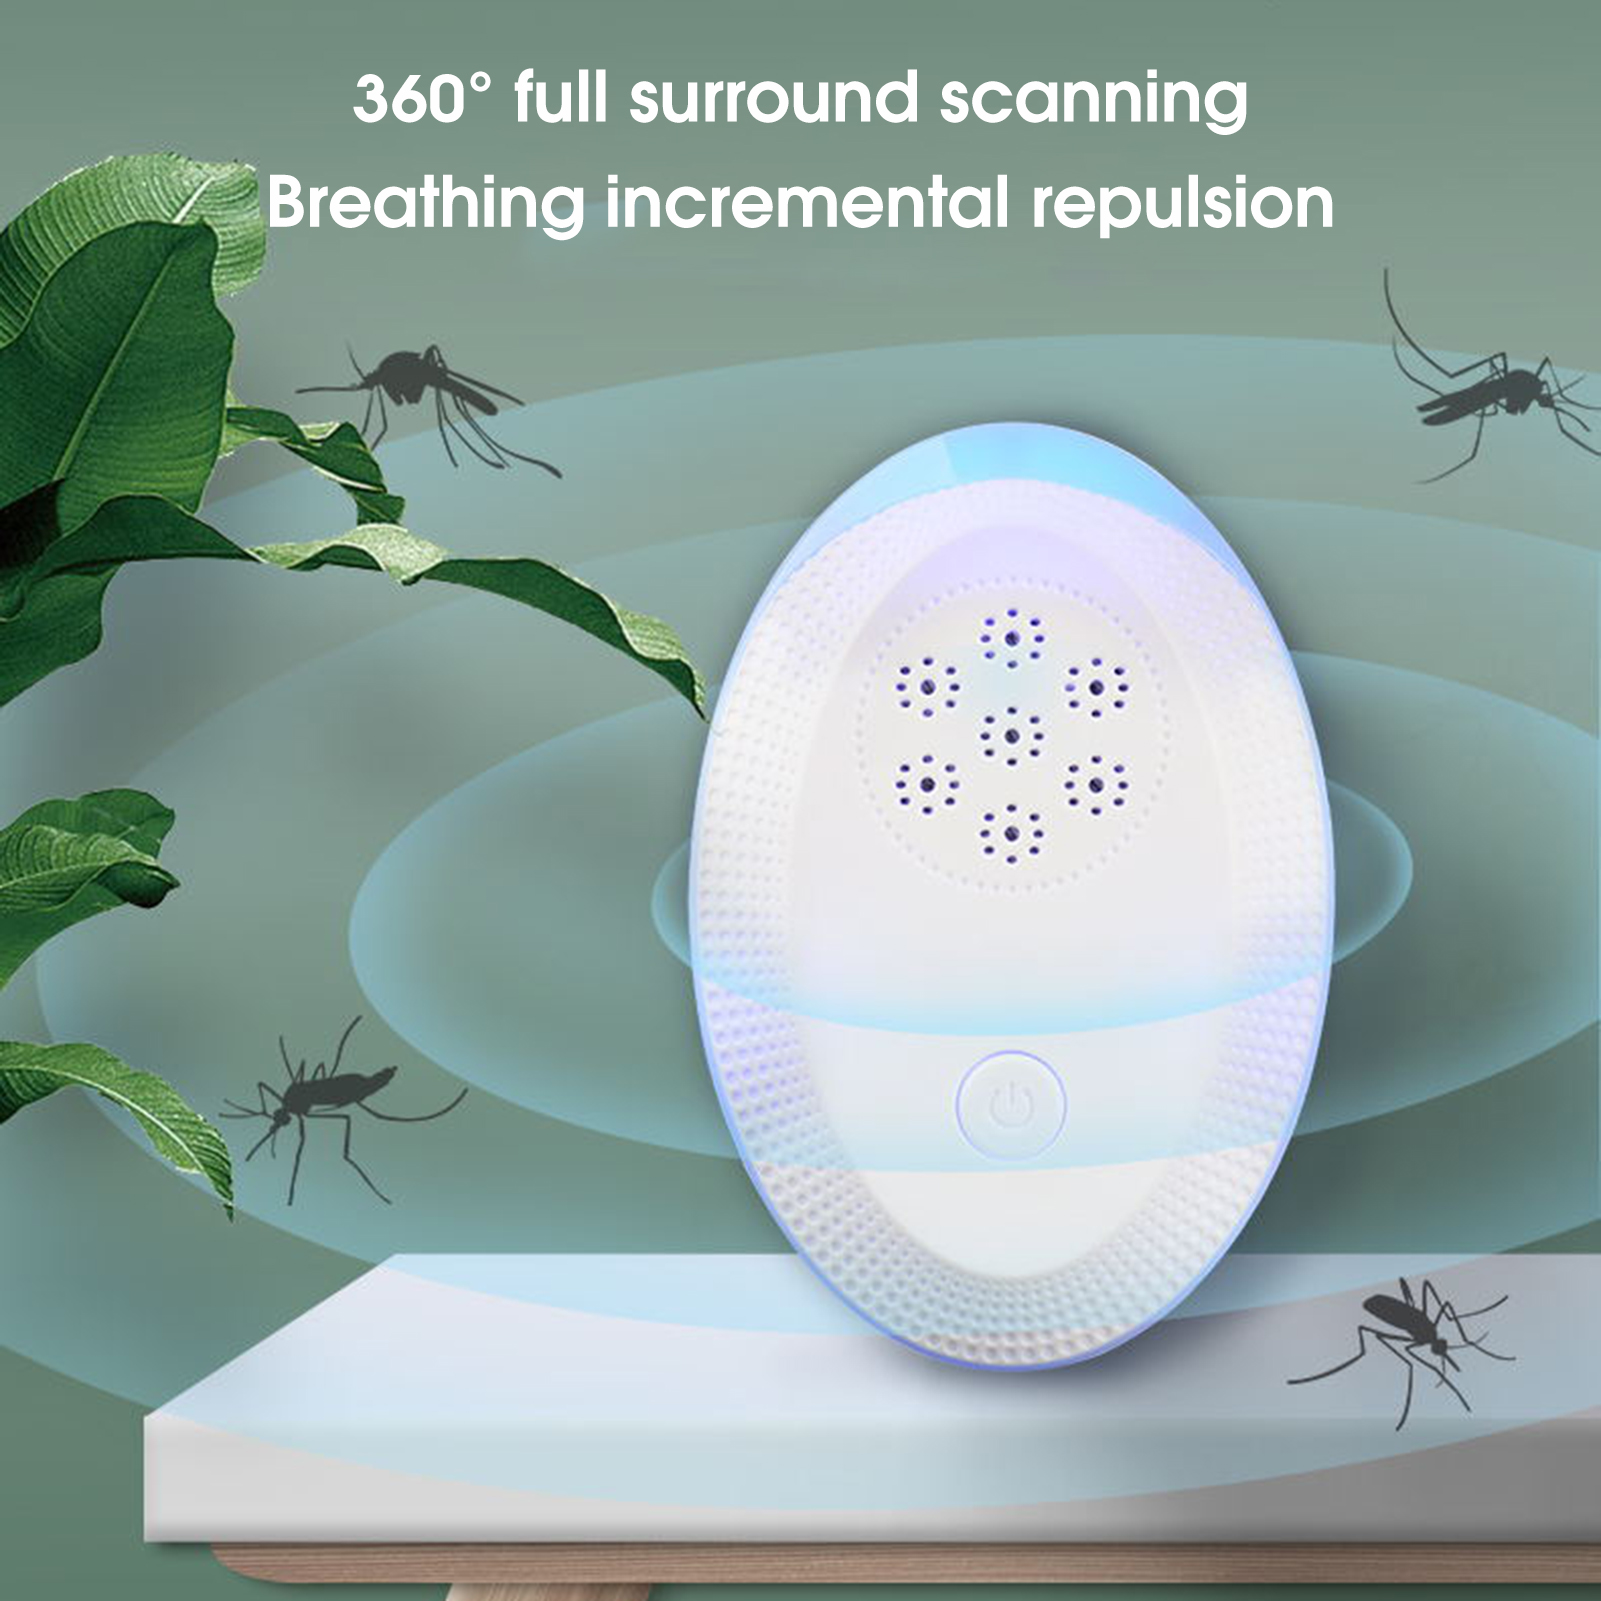 Ultrasonic Pest Repeller 8 Packs Pest Repellent Mosquito Repellent Indoors Mouse Repellent Pest Repellent Ultrasonic Plug in Rodent Repellent Pest Control for Mosquito,Ant,Spider,Cockroach,Mouse DY-218A Featured Image